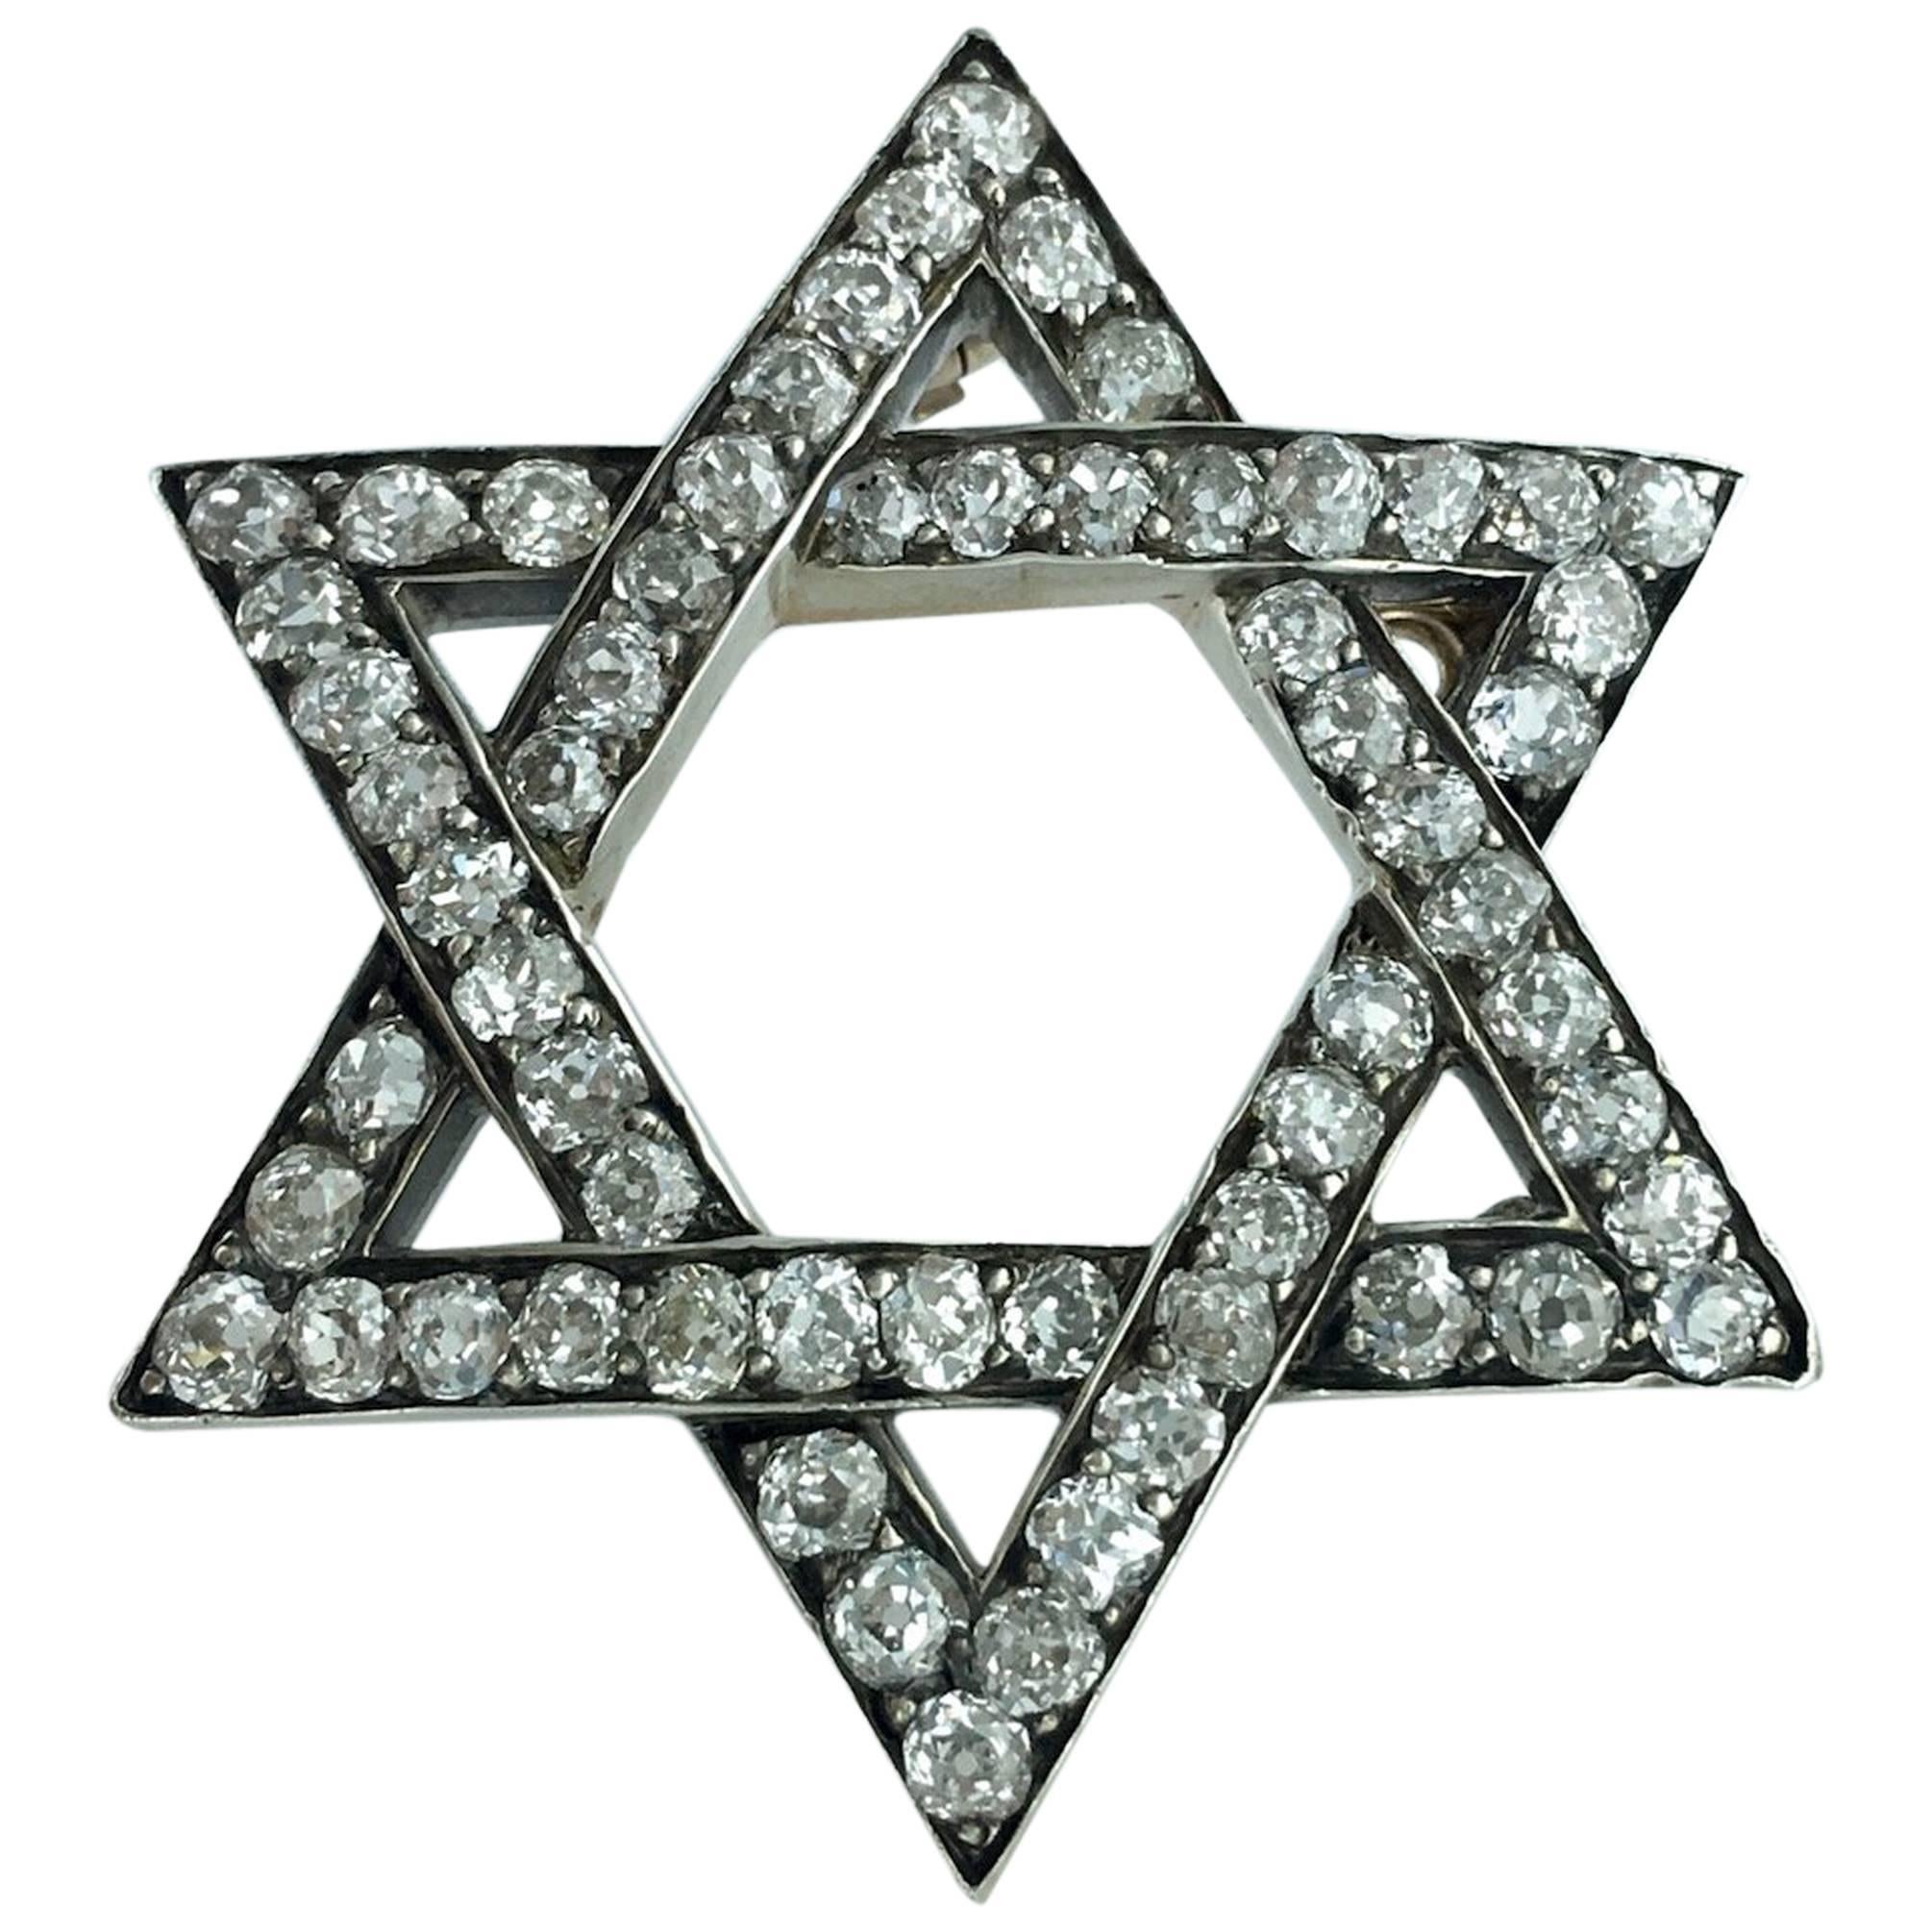 Antique Star of David Diamond Silver and Gold Pendant Brooch